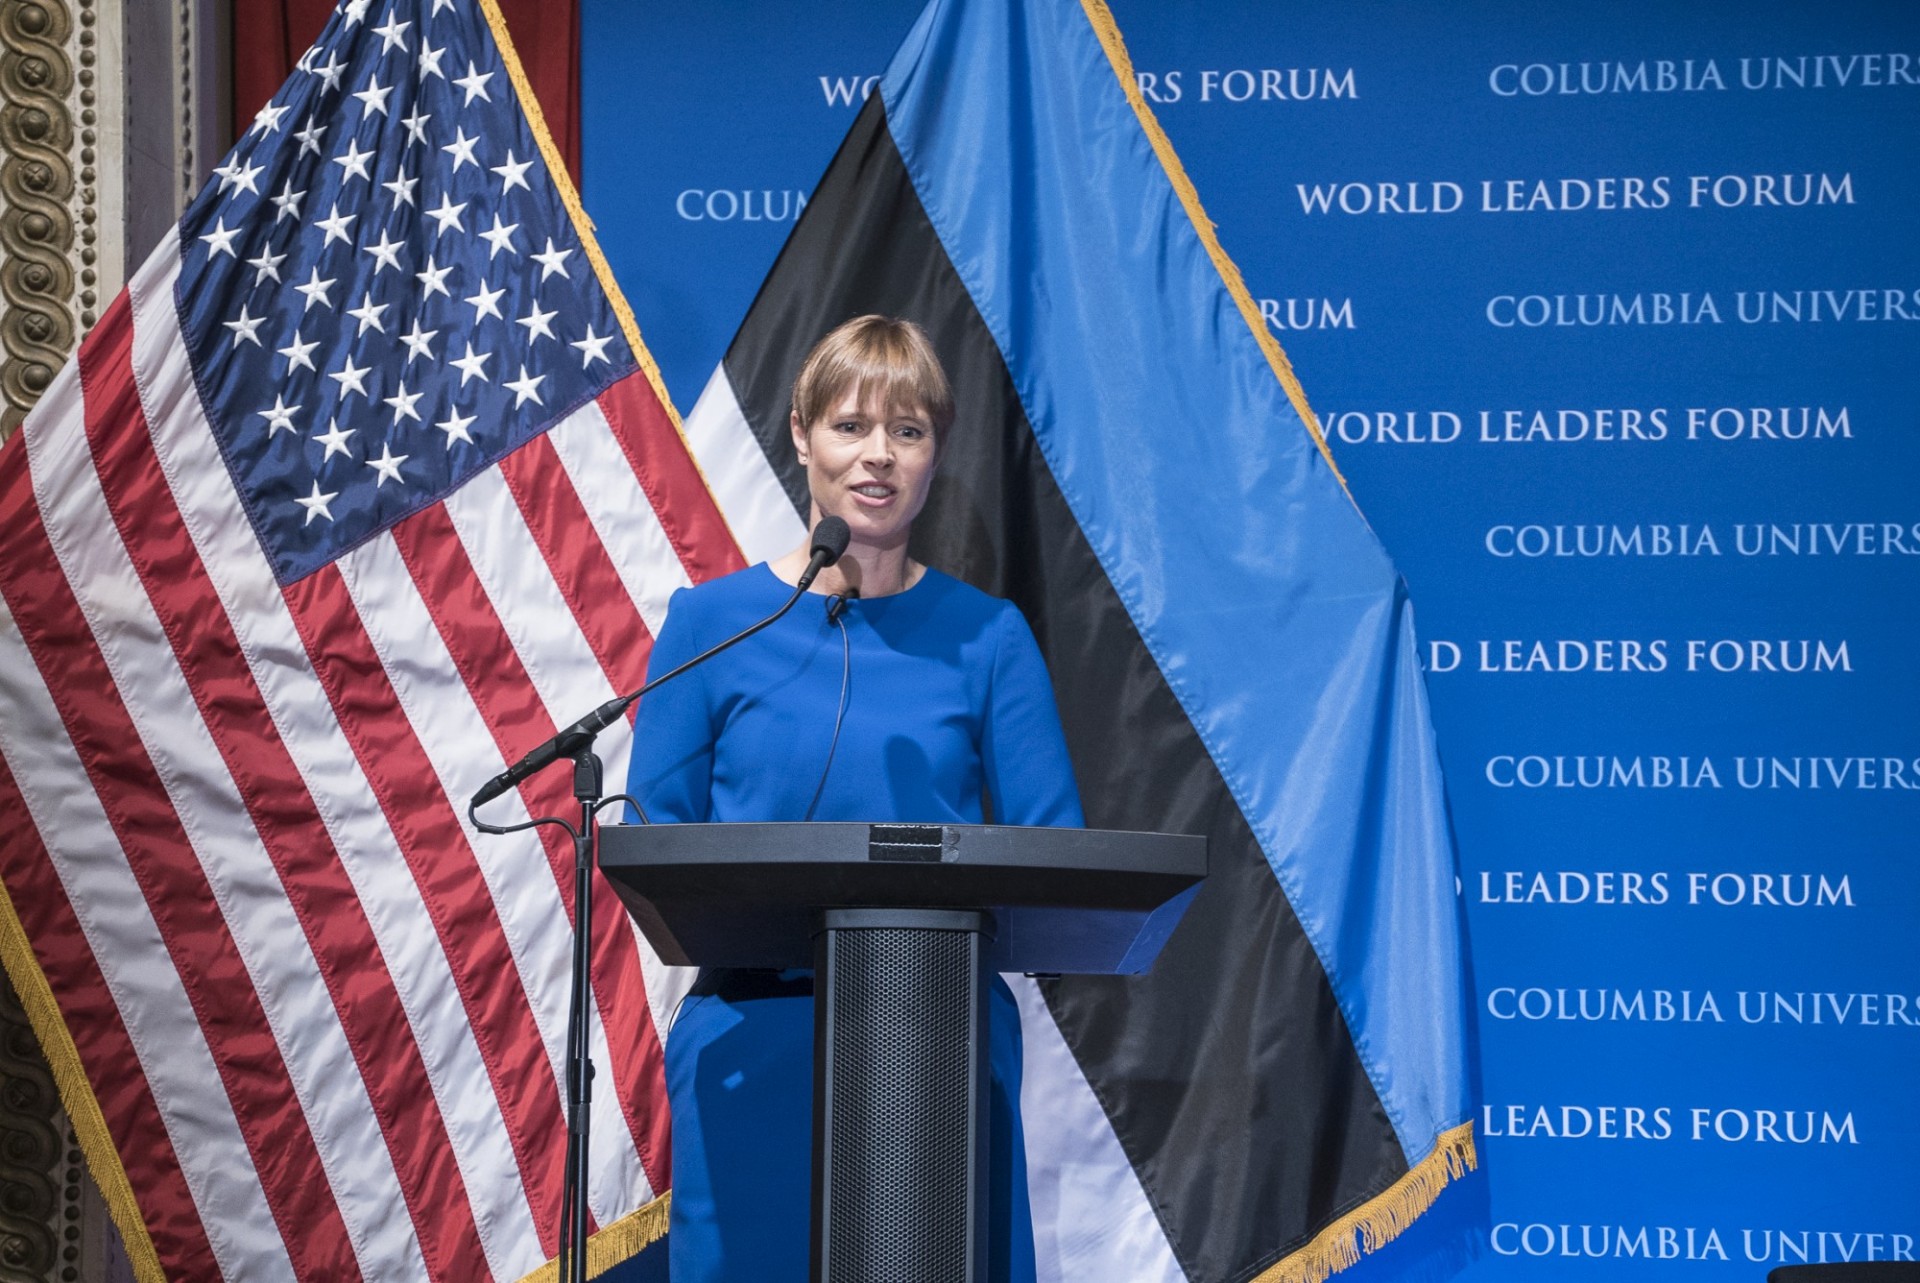 President Kersti Kaljulaid of Estonia delivers her address, “Estonia, the Land of Skype, the Digital Land,” to Columbia University students, faculty and staff.